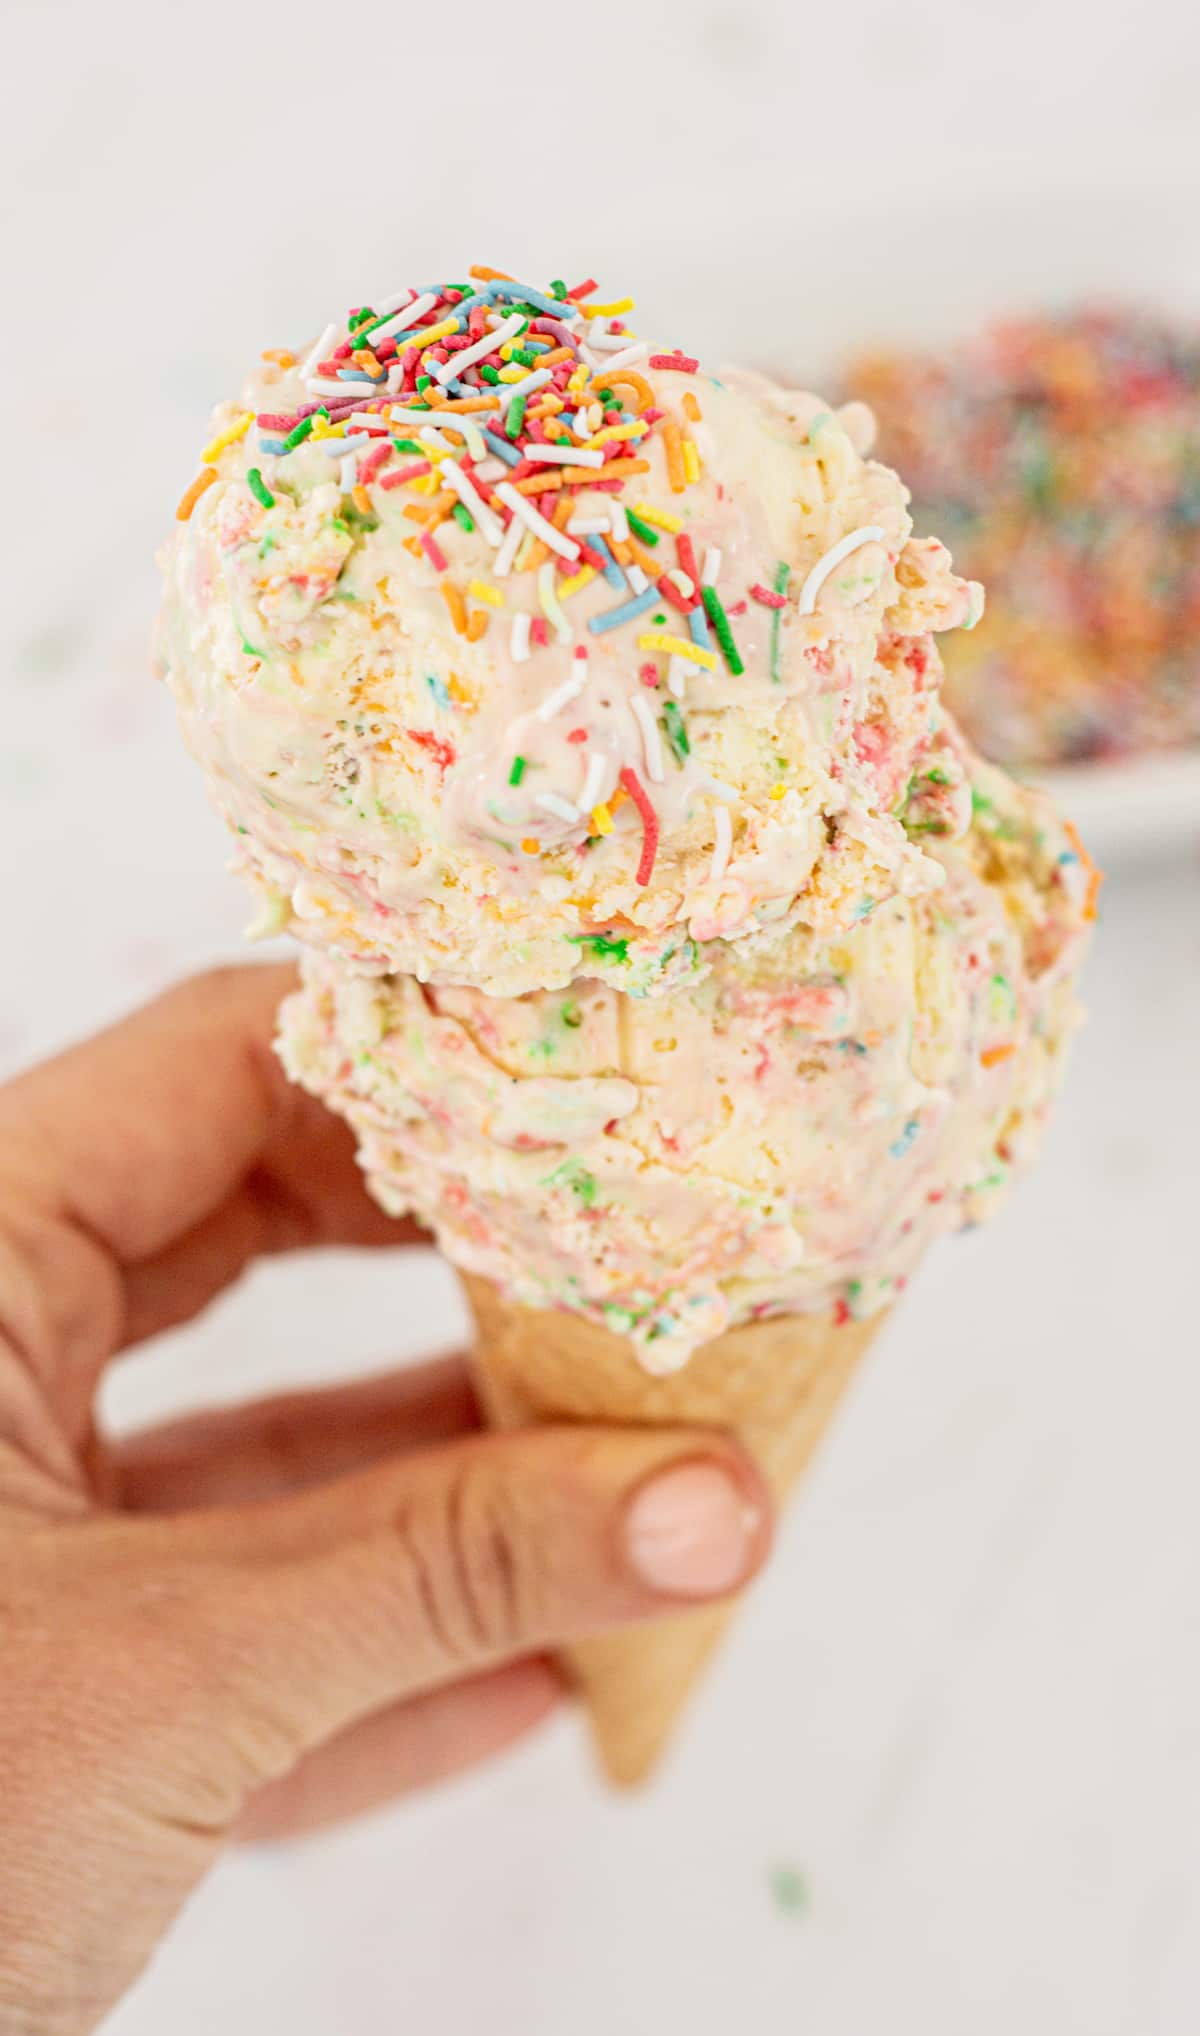 a hand holding a double scoop of sprinkle ice cream.